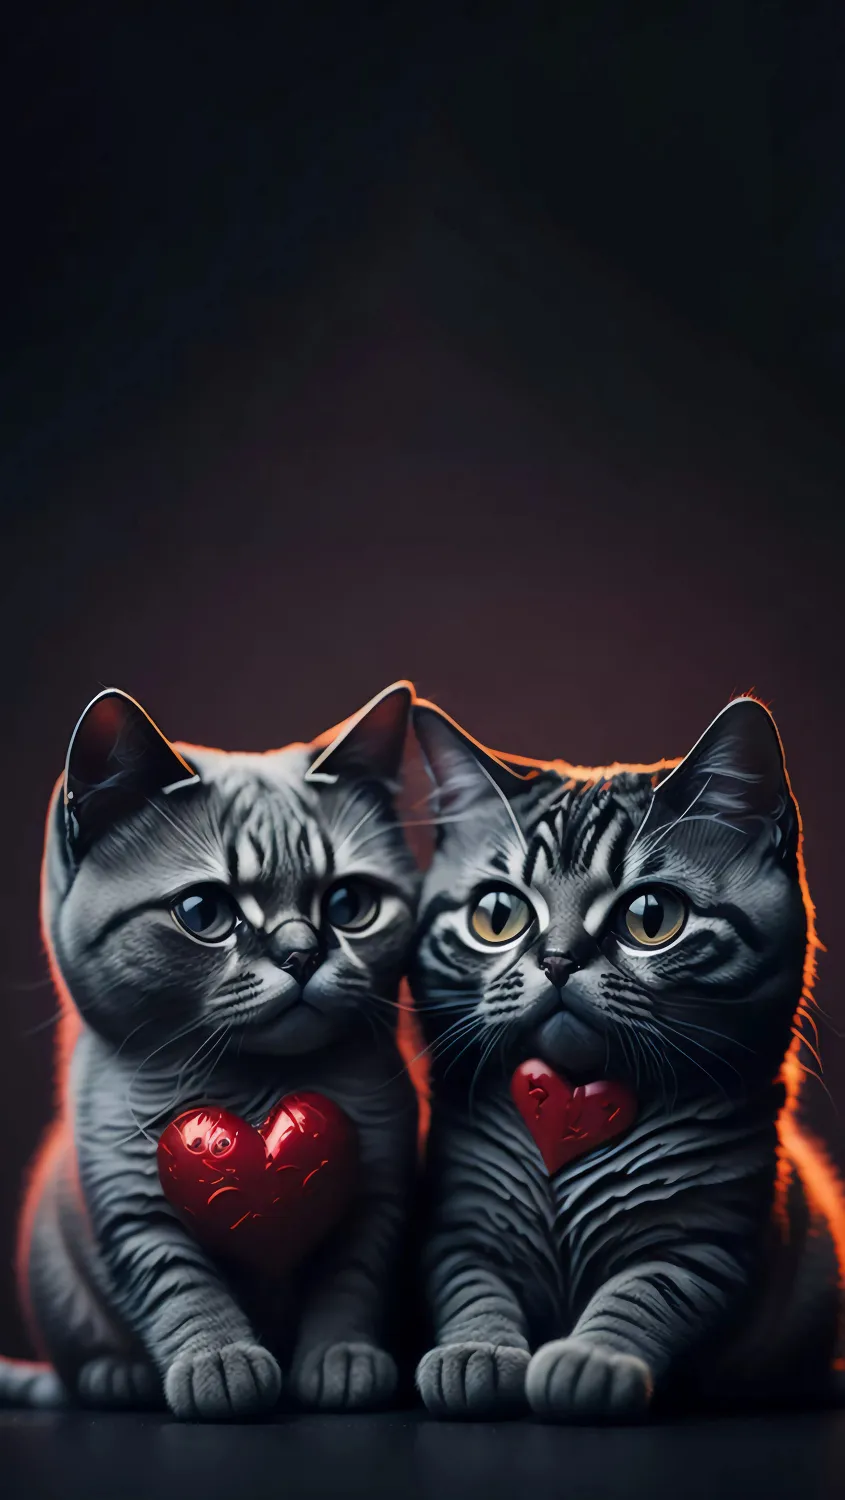 thumb for Cat Baby Couple Wallpaper